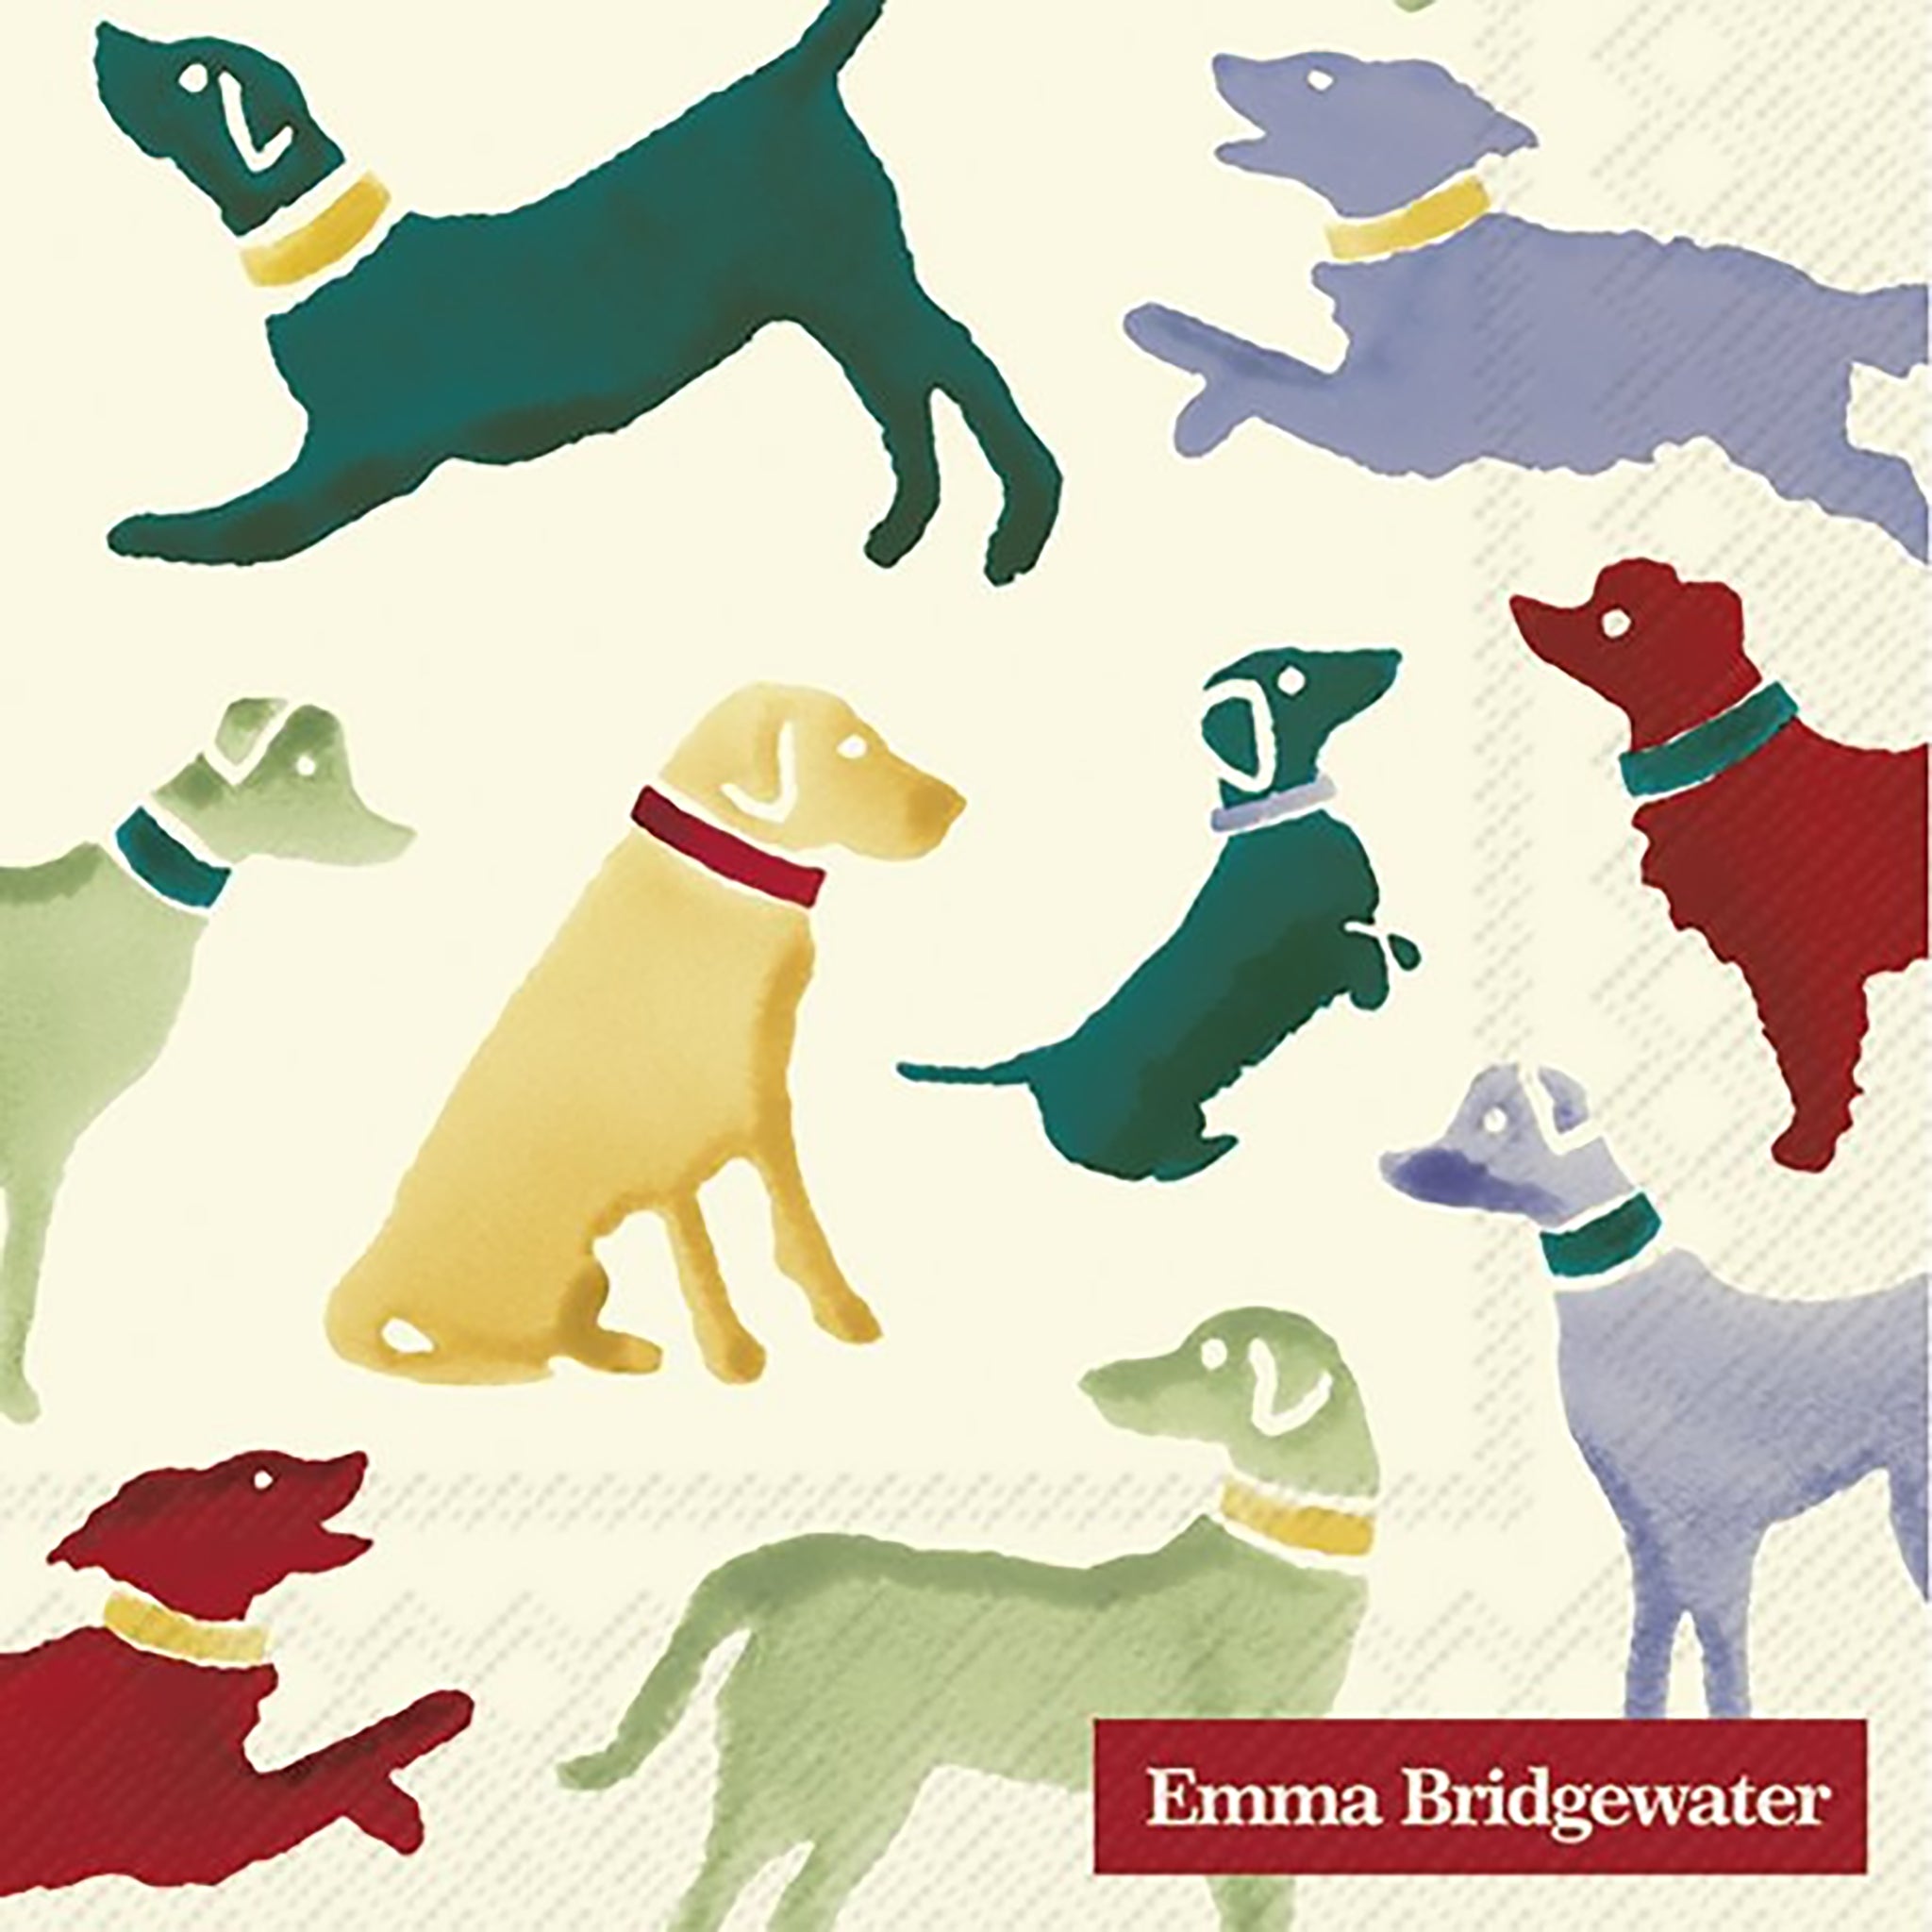 Cocktail napkins with sweet design by Emma Bridgewater of dog silhouettes in a variety of colours and adorable poses